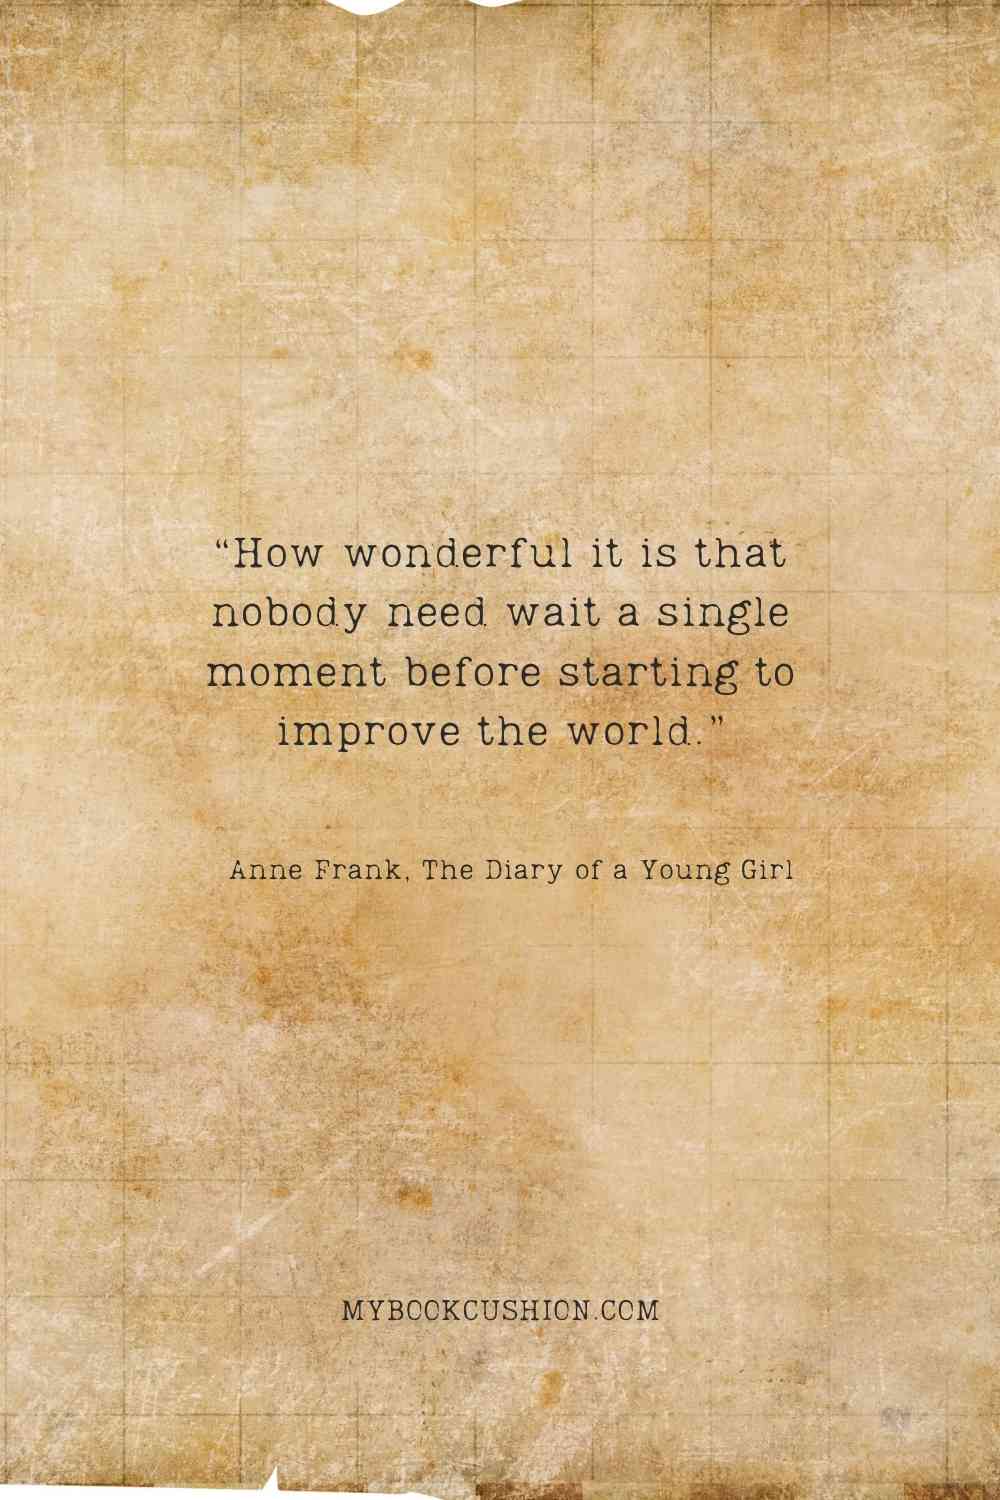 “How wonderful it is that nobody need wait a single moment before starting to improve the world.” - Anne Frank, The Diary of a Young Girl